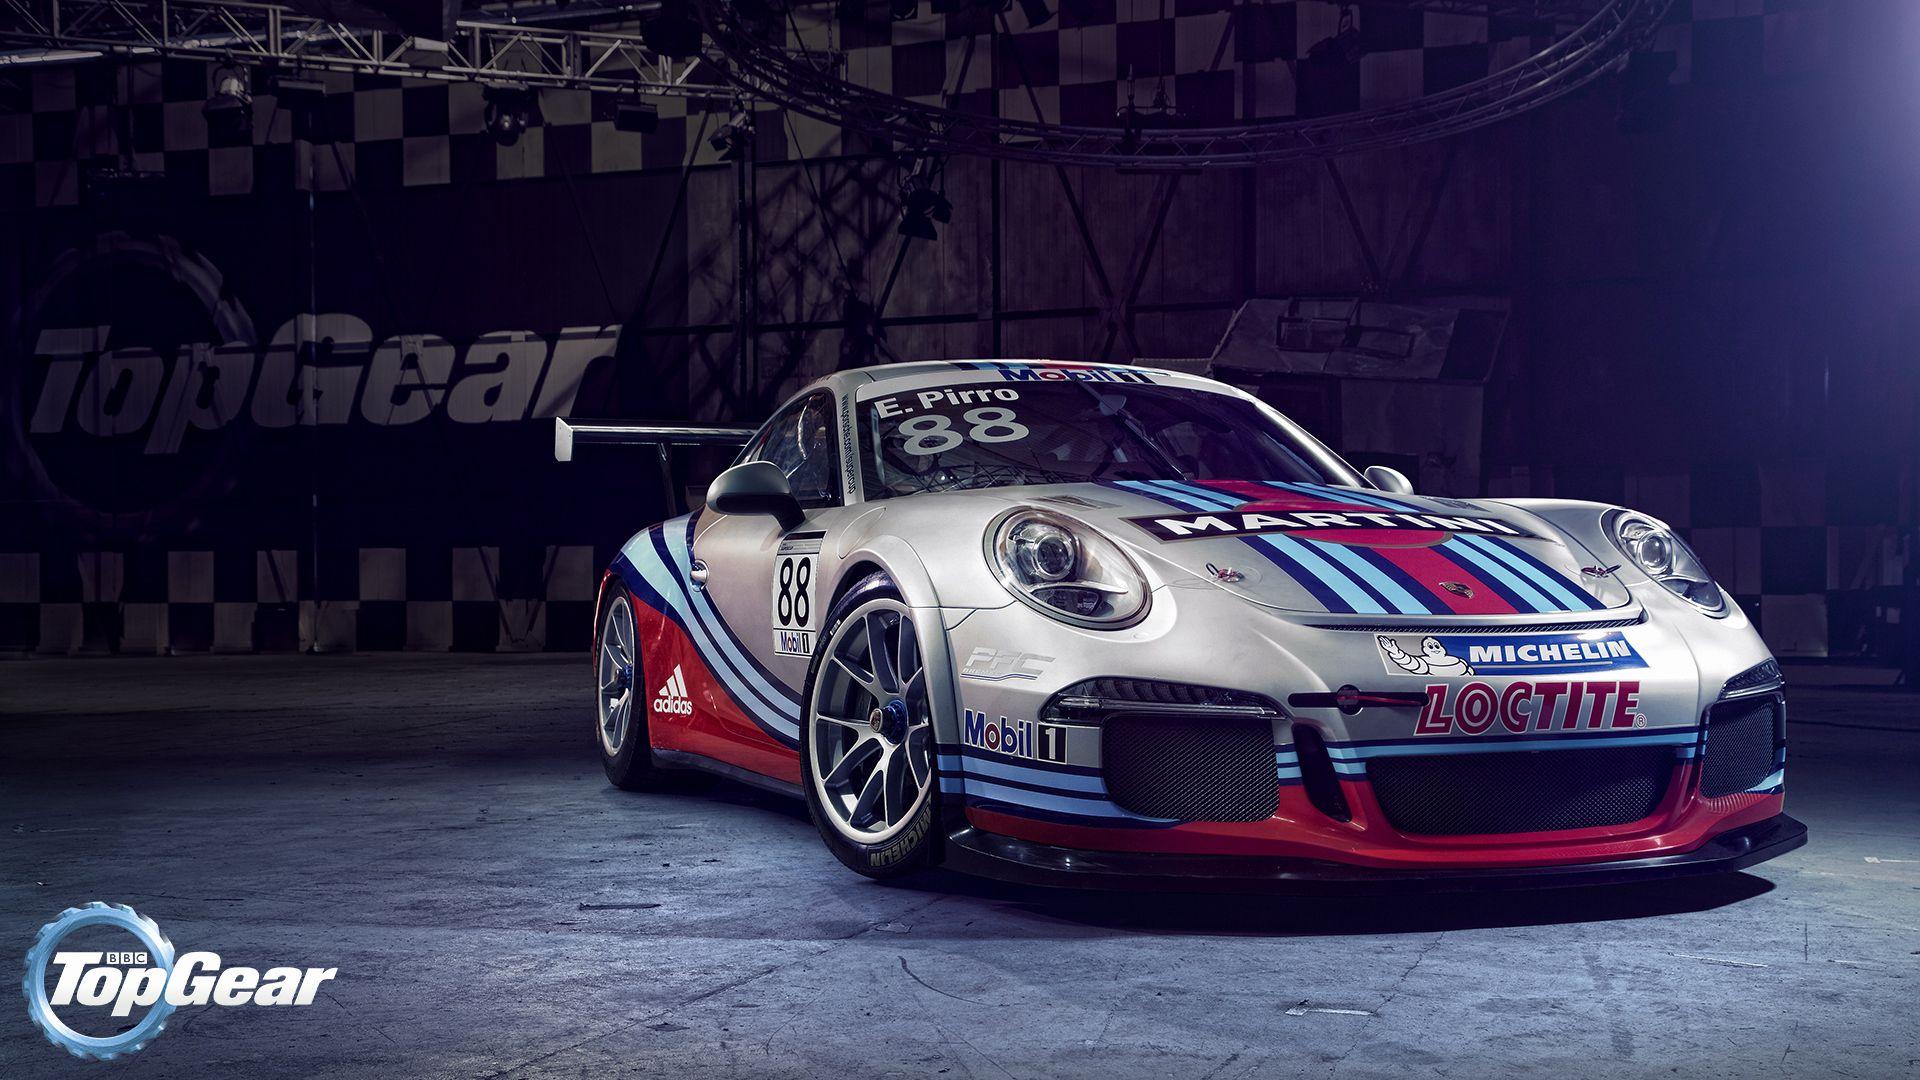 Race Car Wallpaper Awesome Exclusive Wallpaper Martini Race Cars